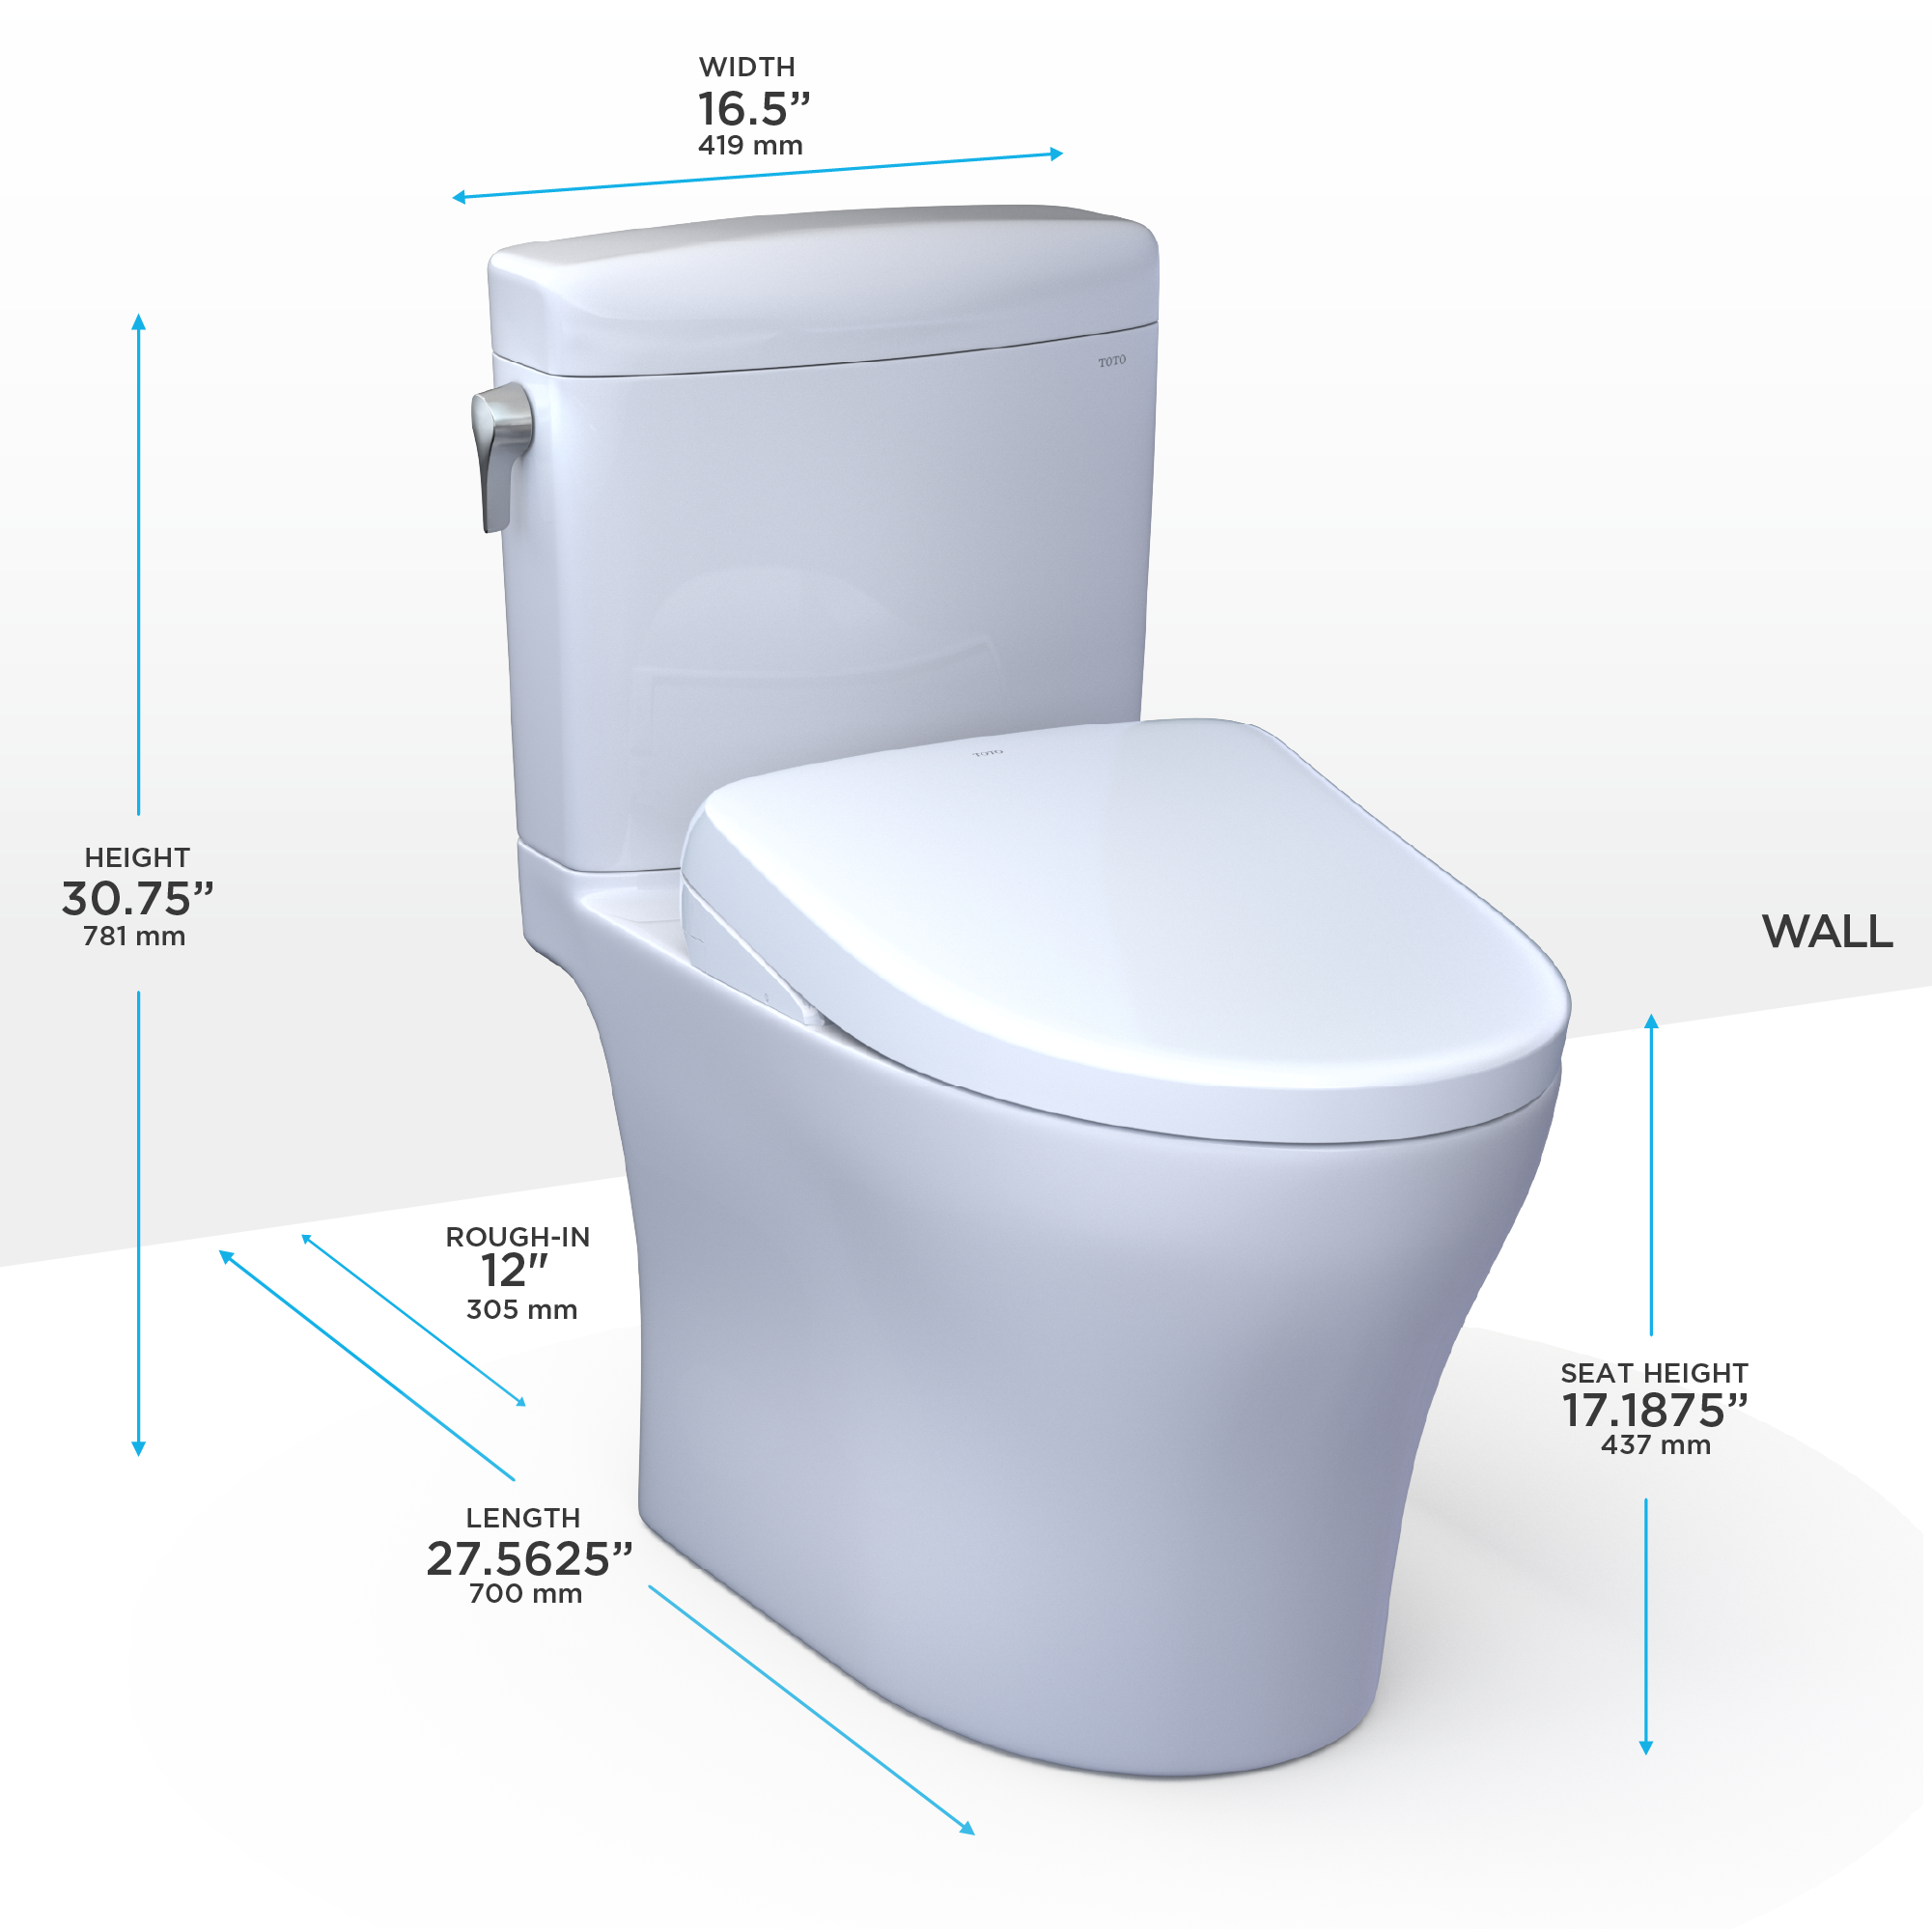 TOTO WASHLET+ Aquia IV Cube Two-Piece Elongated Dual Flush 1.28 and 0.9 GPF Toilet with S7 Contemporary Bidet Seat, Cotton White - MW4364726CEMFGN#01, MW4364726CEMFGNA#01